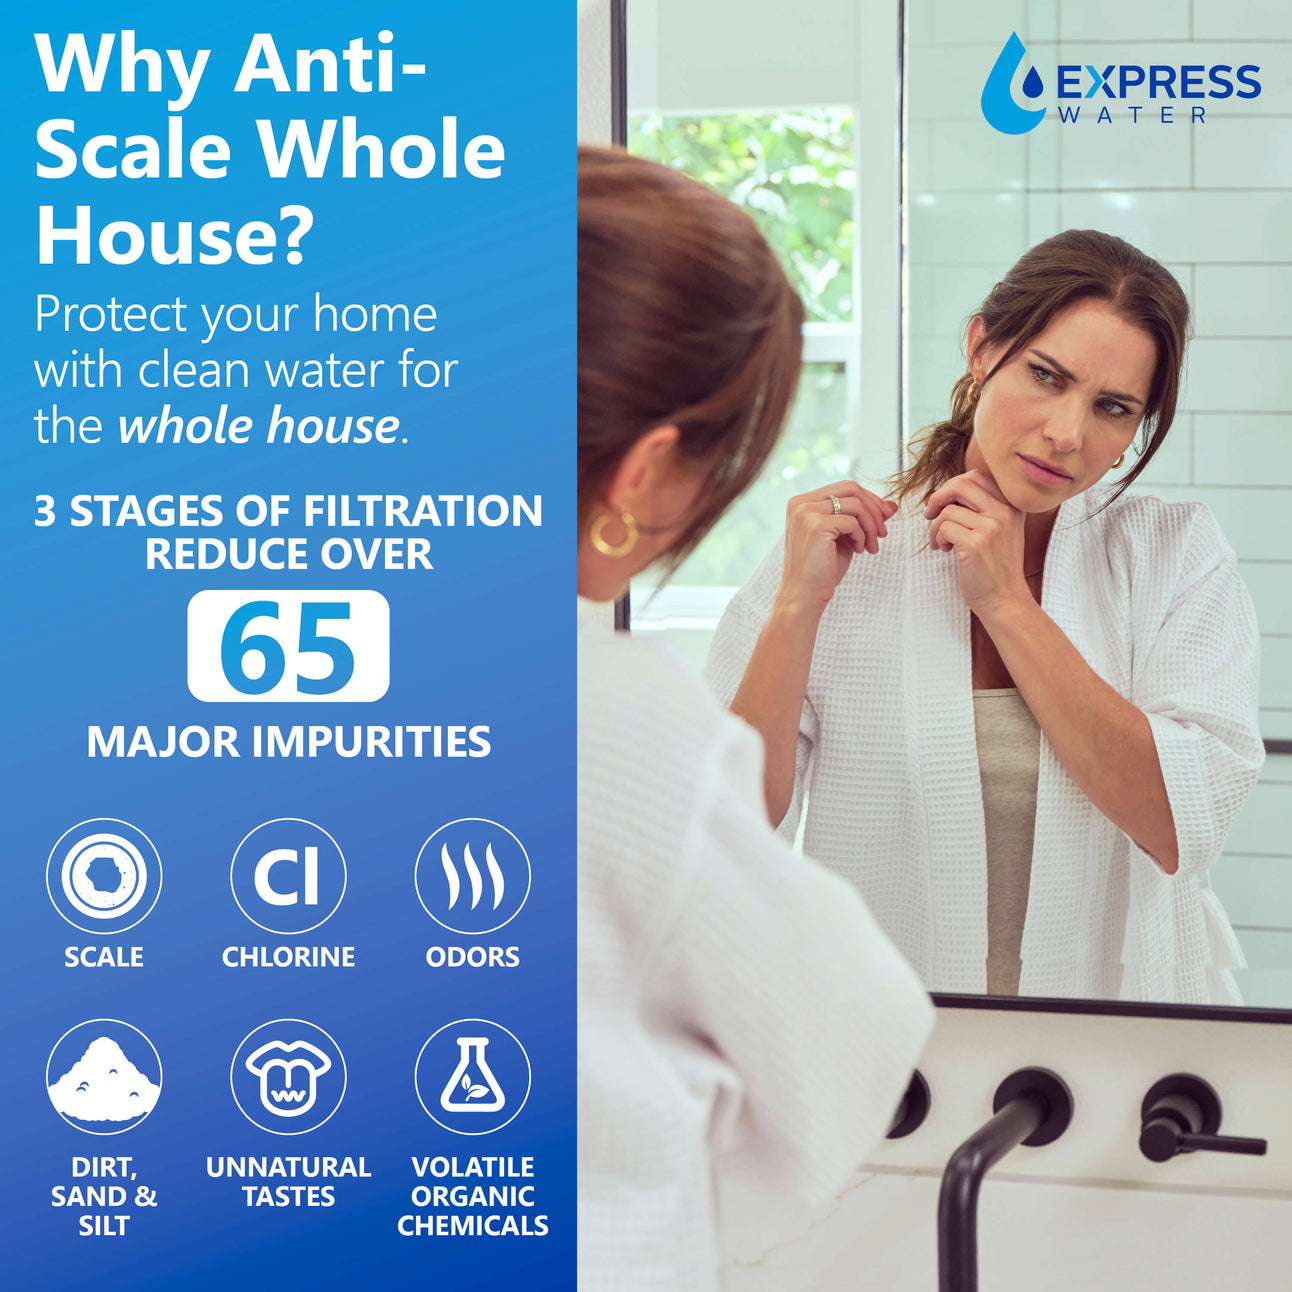 Anti-Scale Whole House Water Filter | Express Water